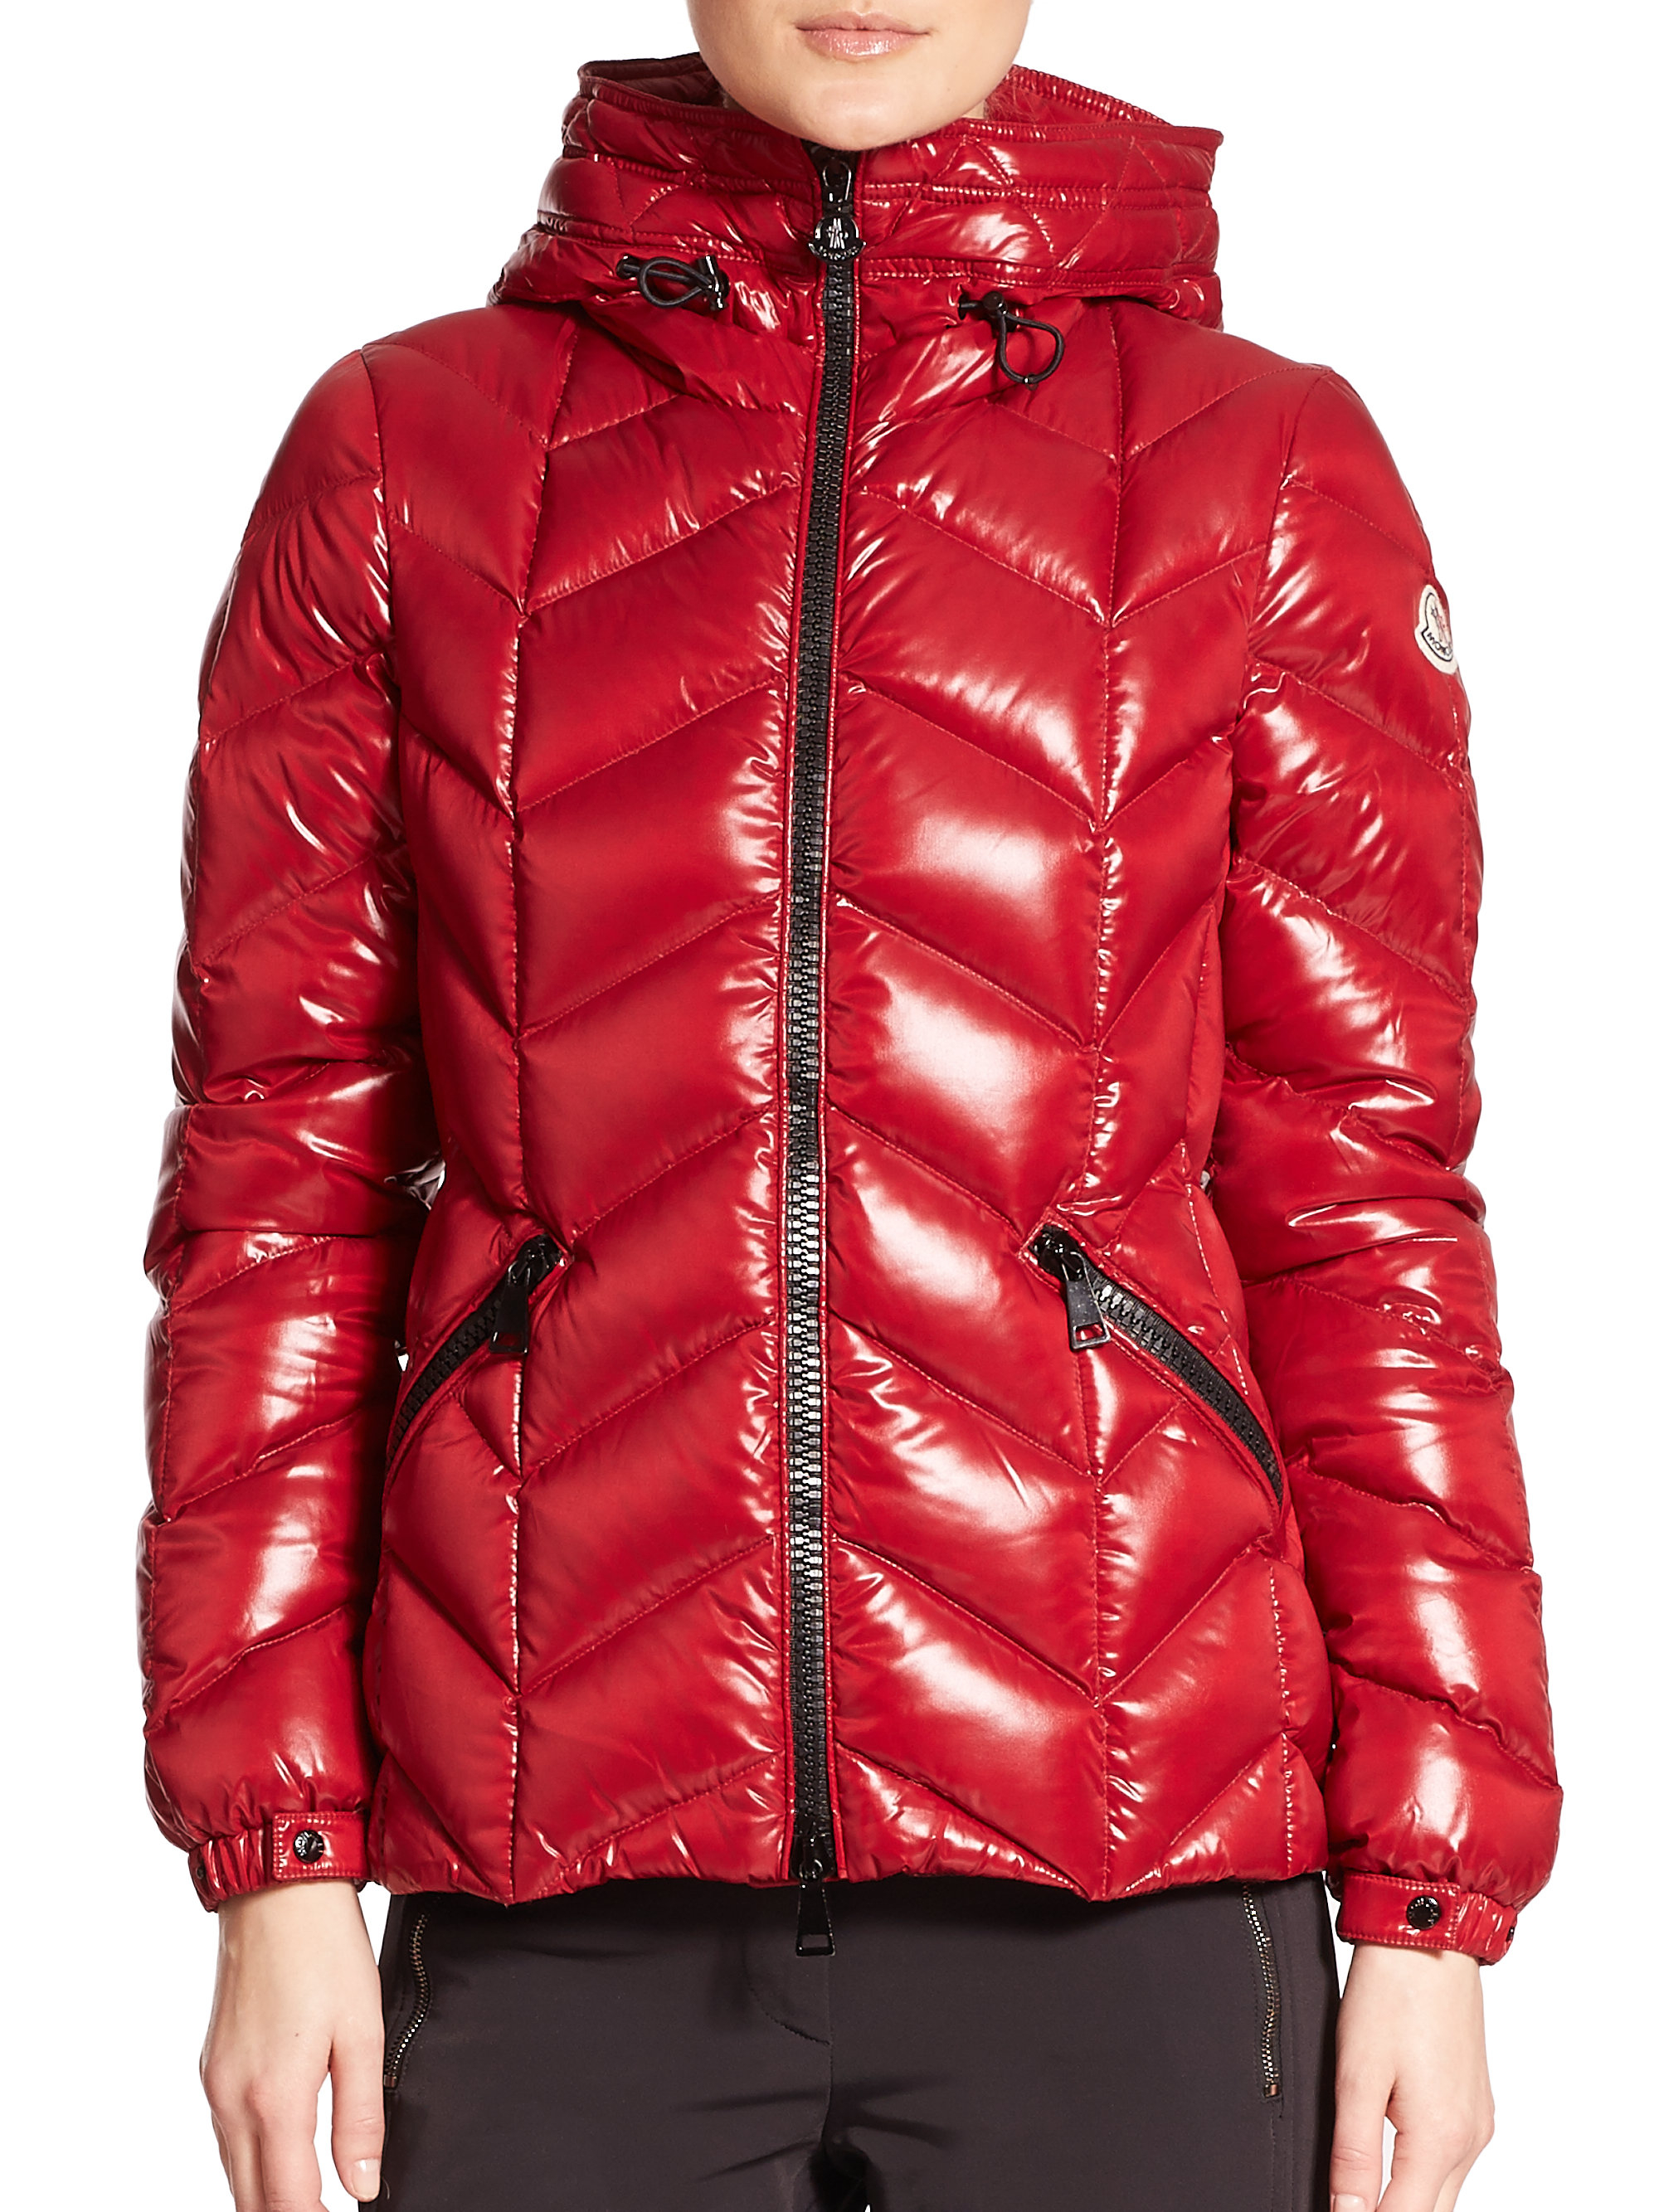 moncler red | Peninsula Conflict Resolution Center